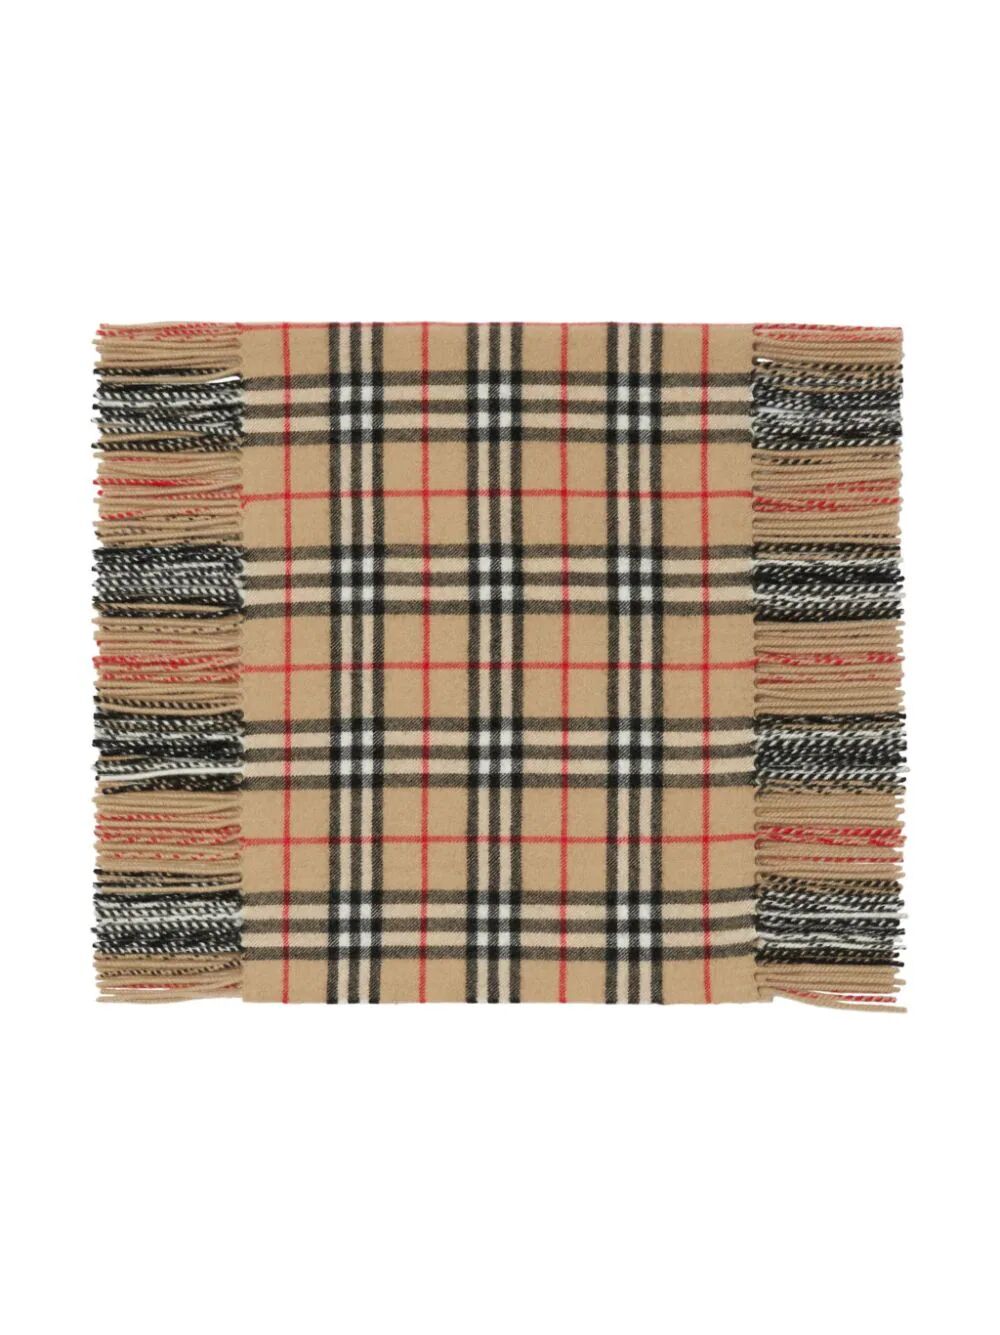 BURBERRY LONDON ENGLAND CHECK SCARF WITH FRINGES